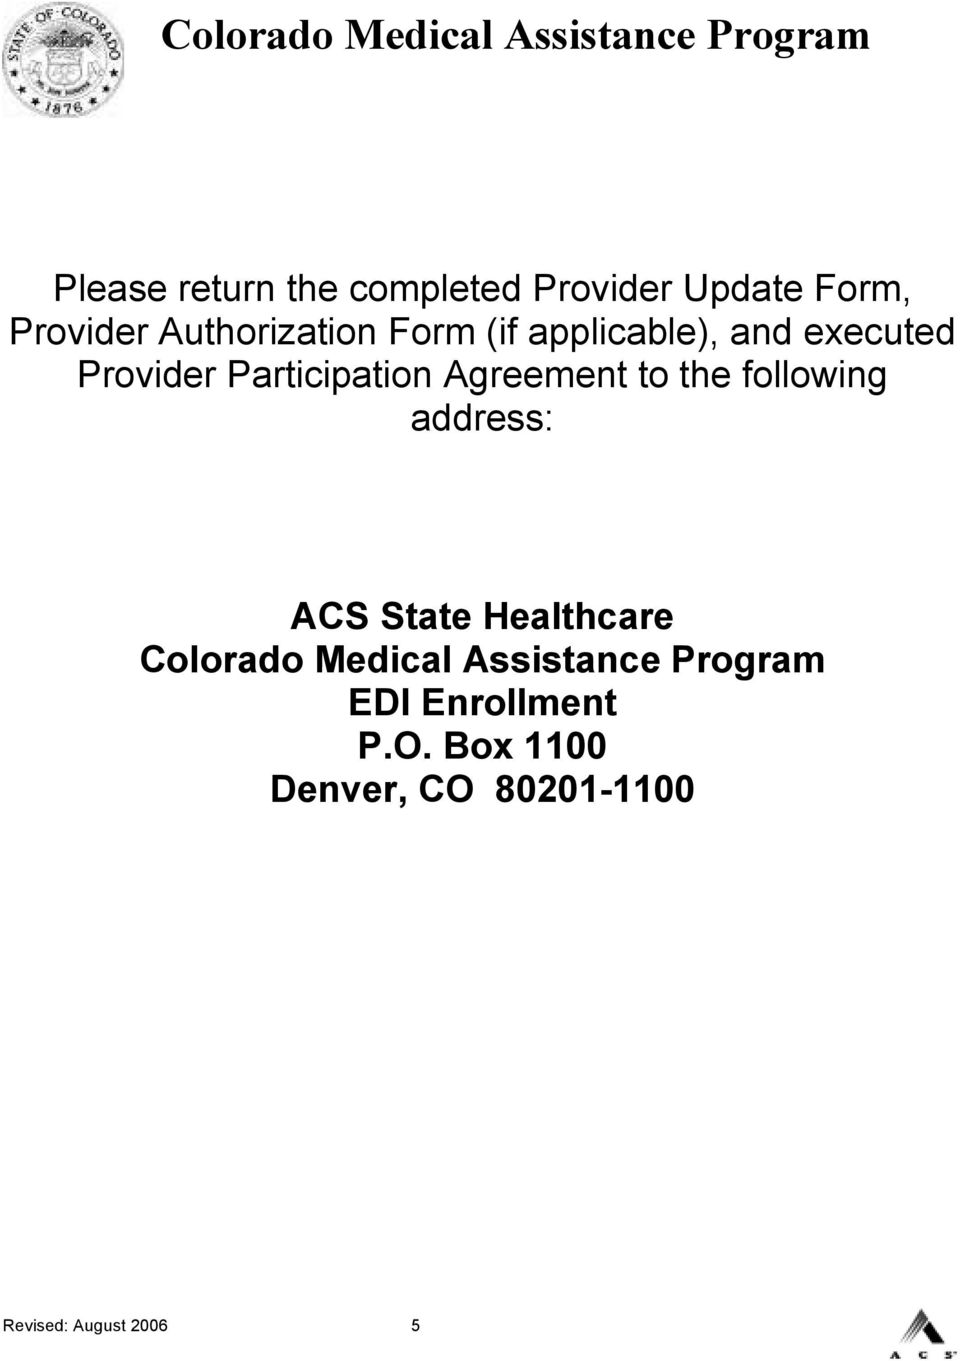 following address: ACS State Healthcare Colorado Medical Assistance